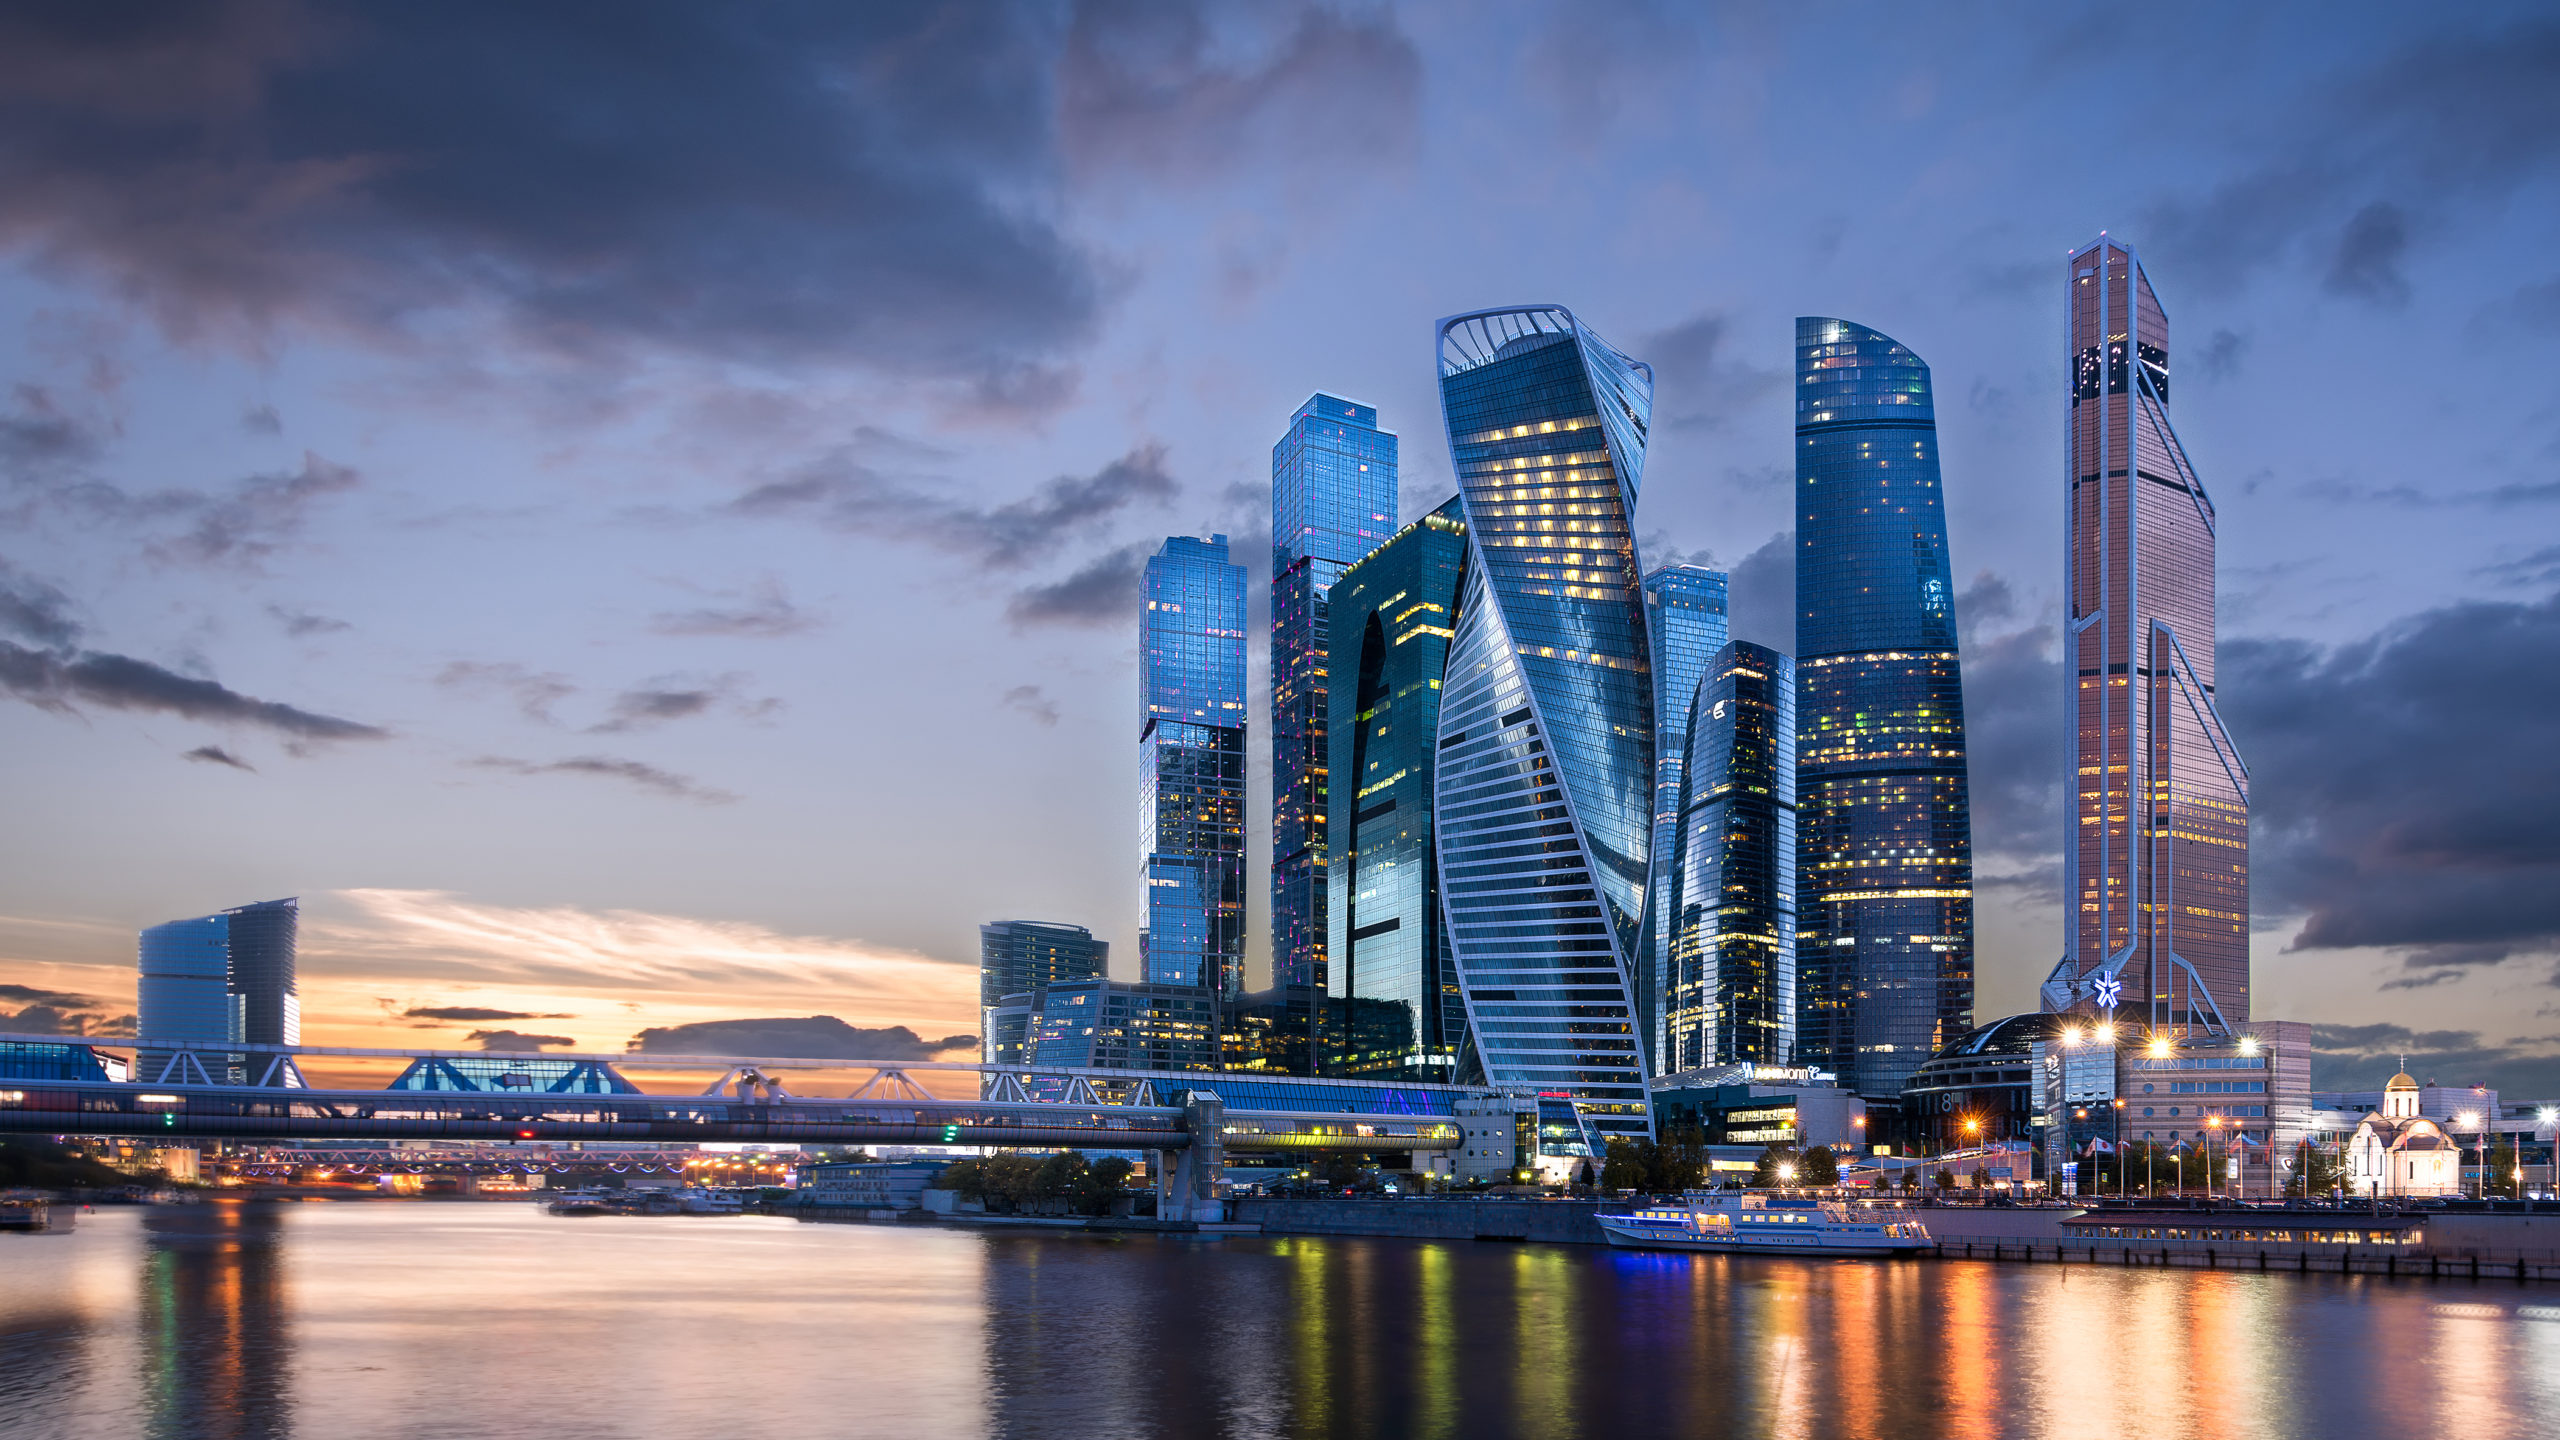 Moscow International Business Center at sunset